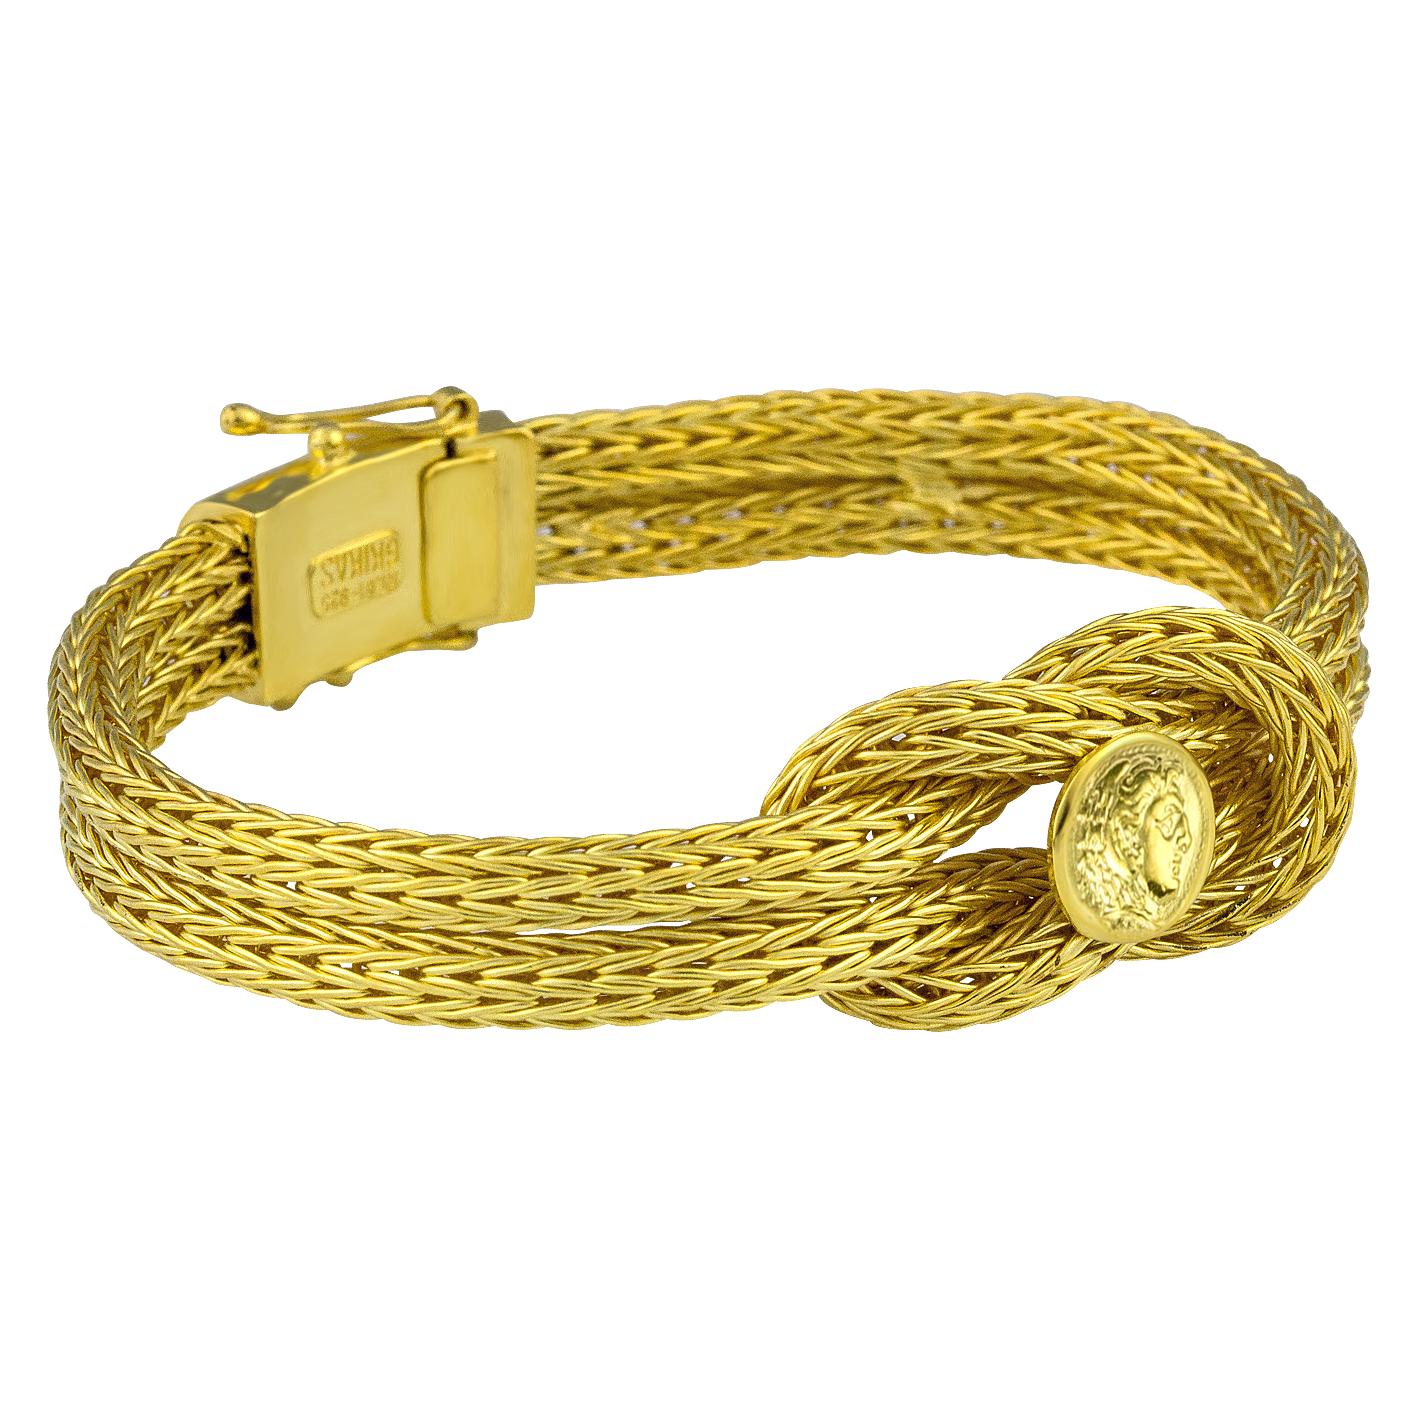 S.Georgios designer bracelet handknitted in our workshop in Greece from 18 Karat yellow gold threads all custom-made. This flexible bracelet decorates Hercules Knot, the symbol of strength, healing, and protection, and a replica of the Alexander The